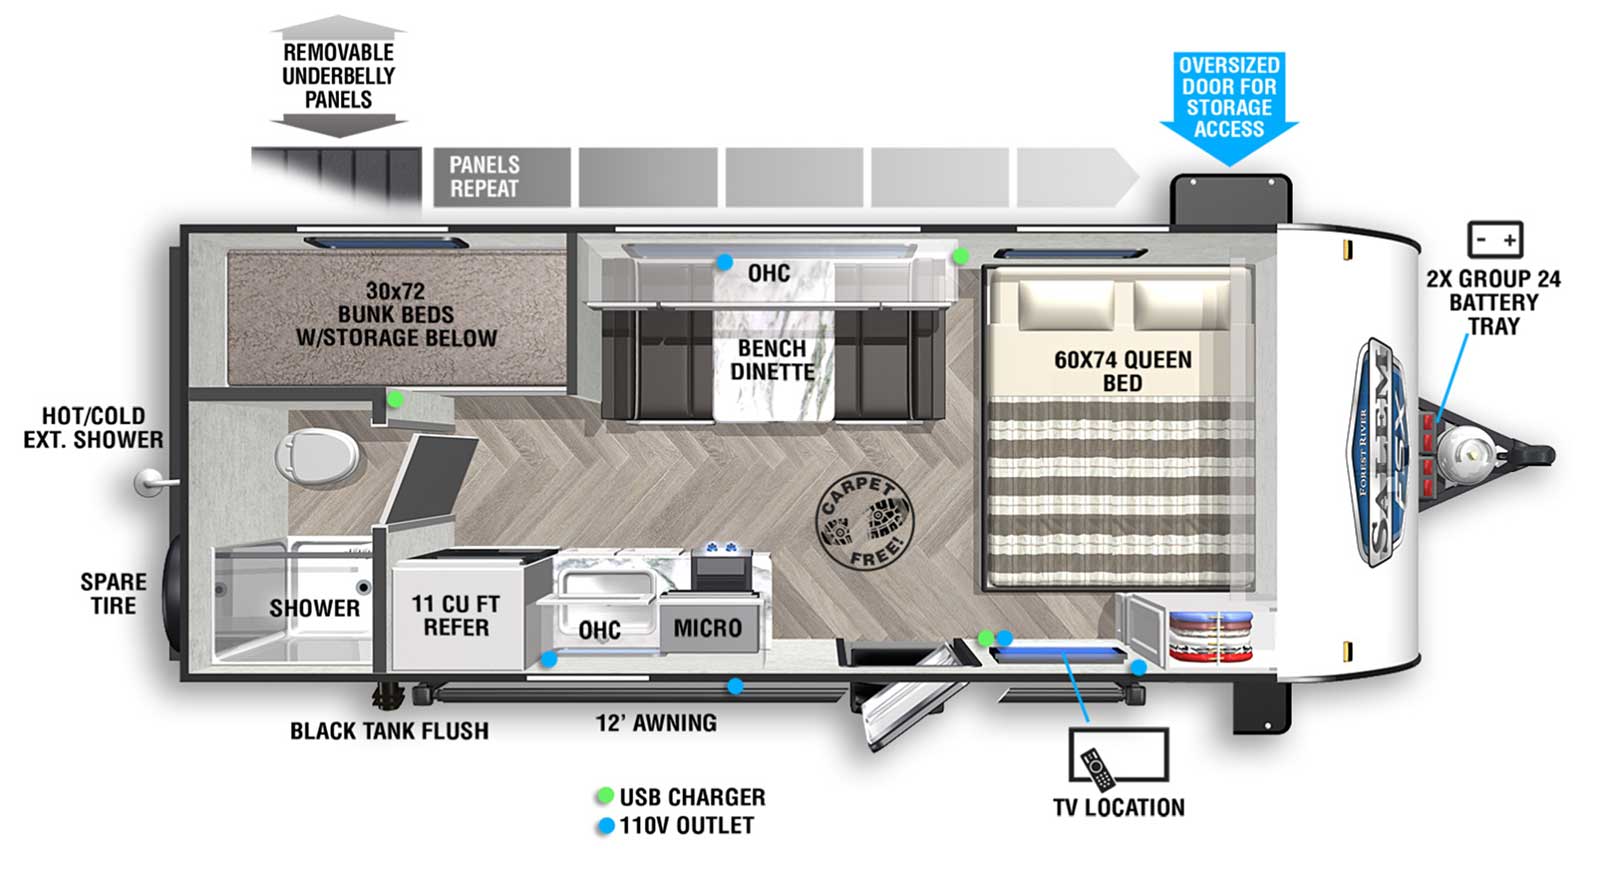 Salem FSX 177BH floorplan. The 177BH has no slide outs and one entry door.